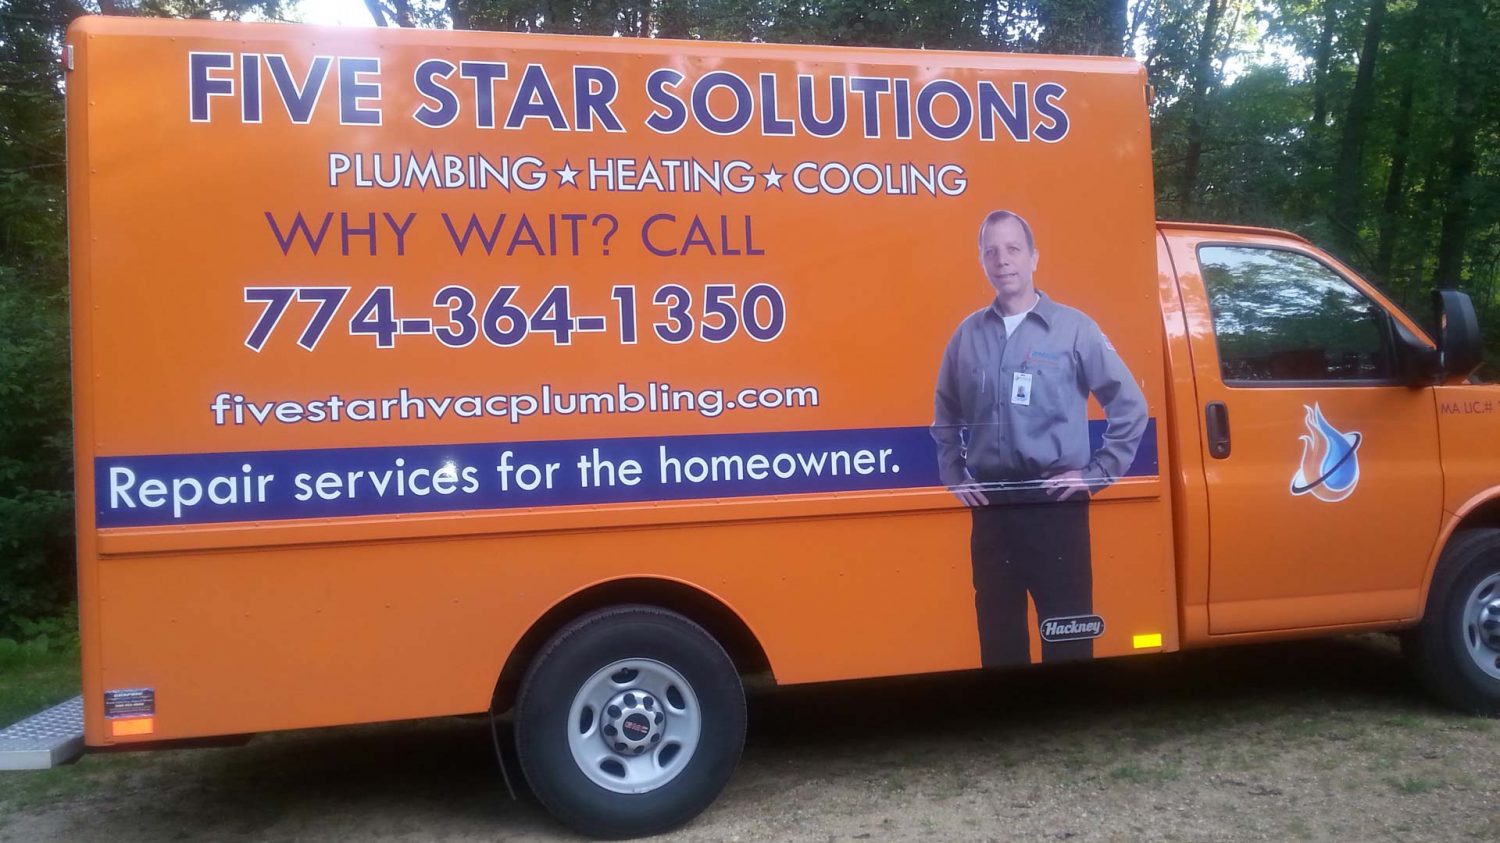 A photo of the Five Star Solutions truck